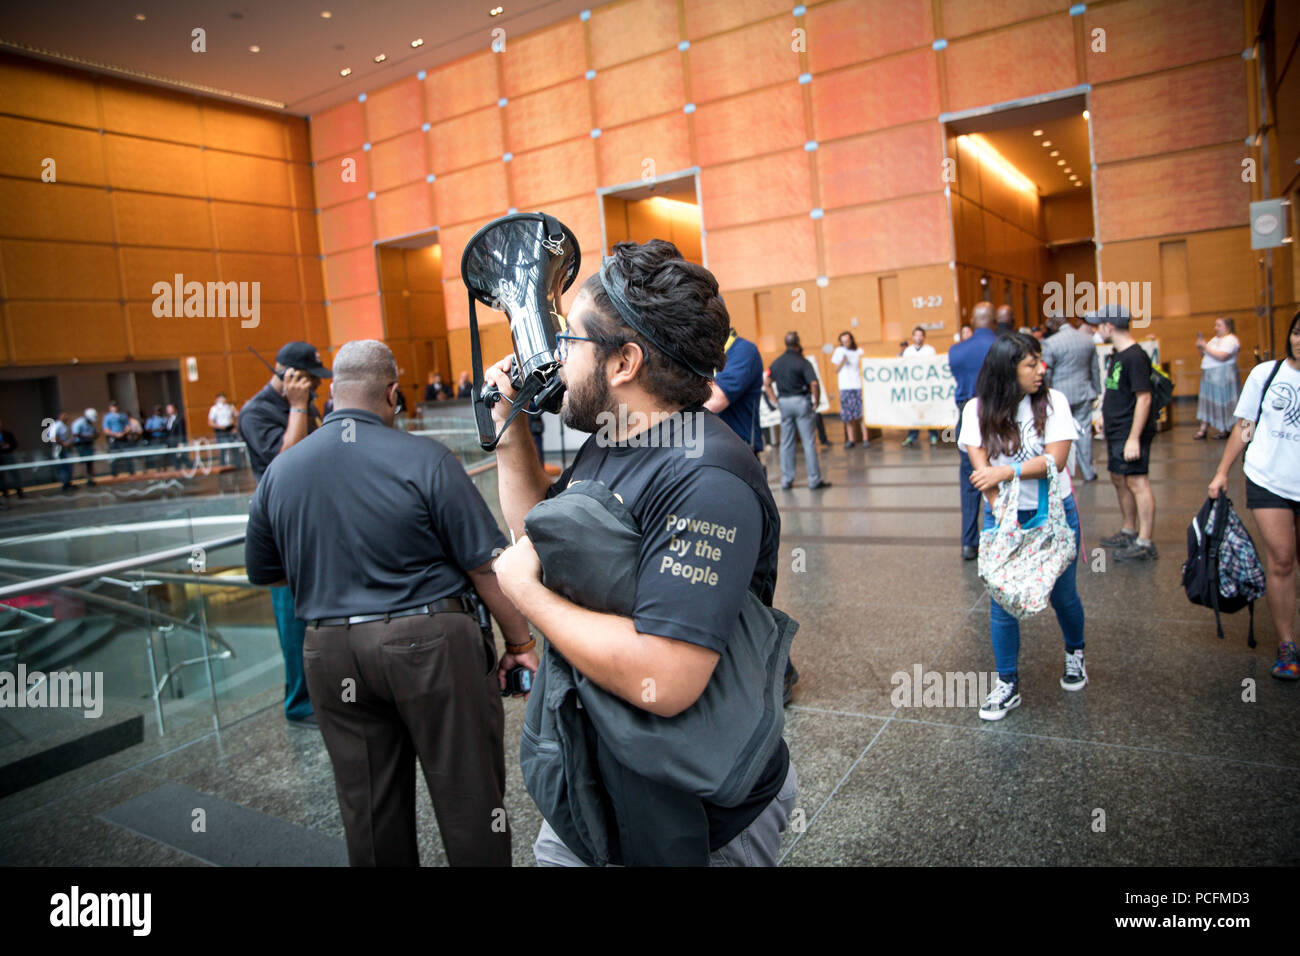 Philadelphia, USA. 31st July, 2018, Philadelphia, USA, Protesters arrested following an occupation of the Comcast building in protest of Comcast's contracts with Immigration and Customs Enforcement (ICE) Credit: Rachael Warriner/Alamy Live News Stock Photo